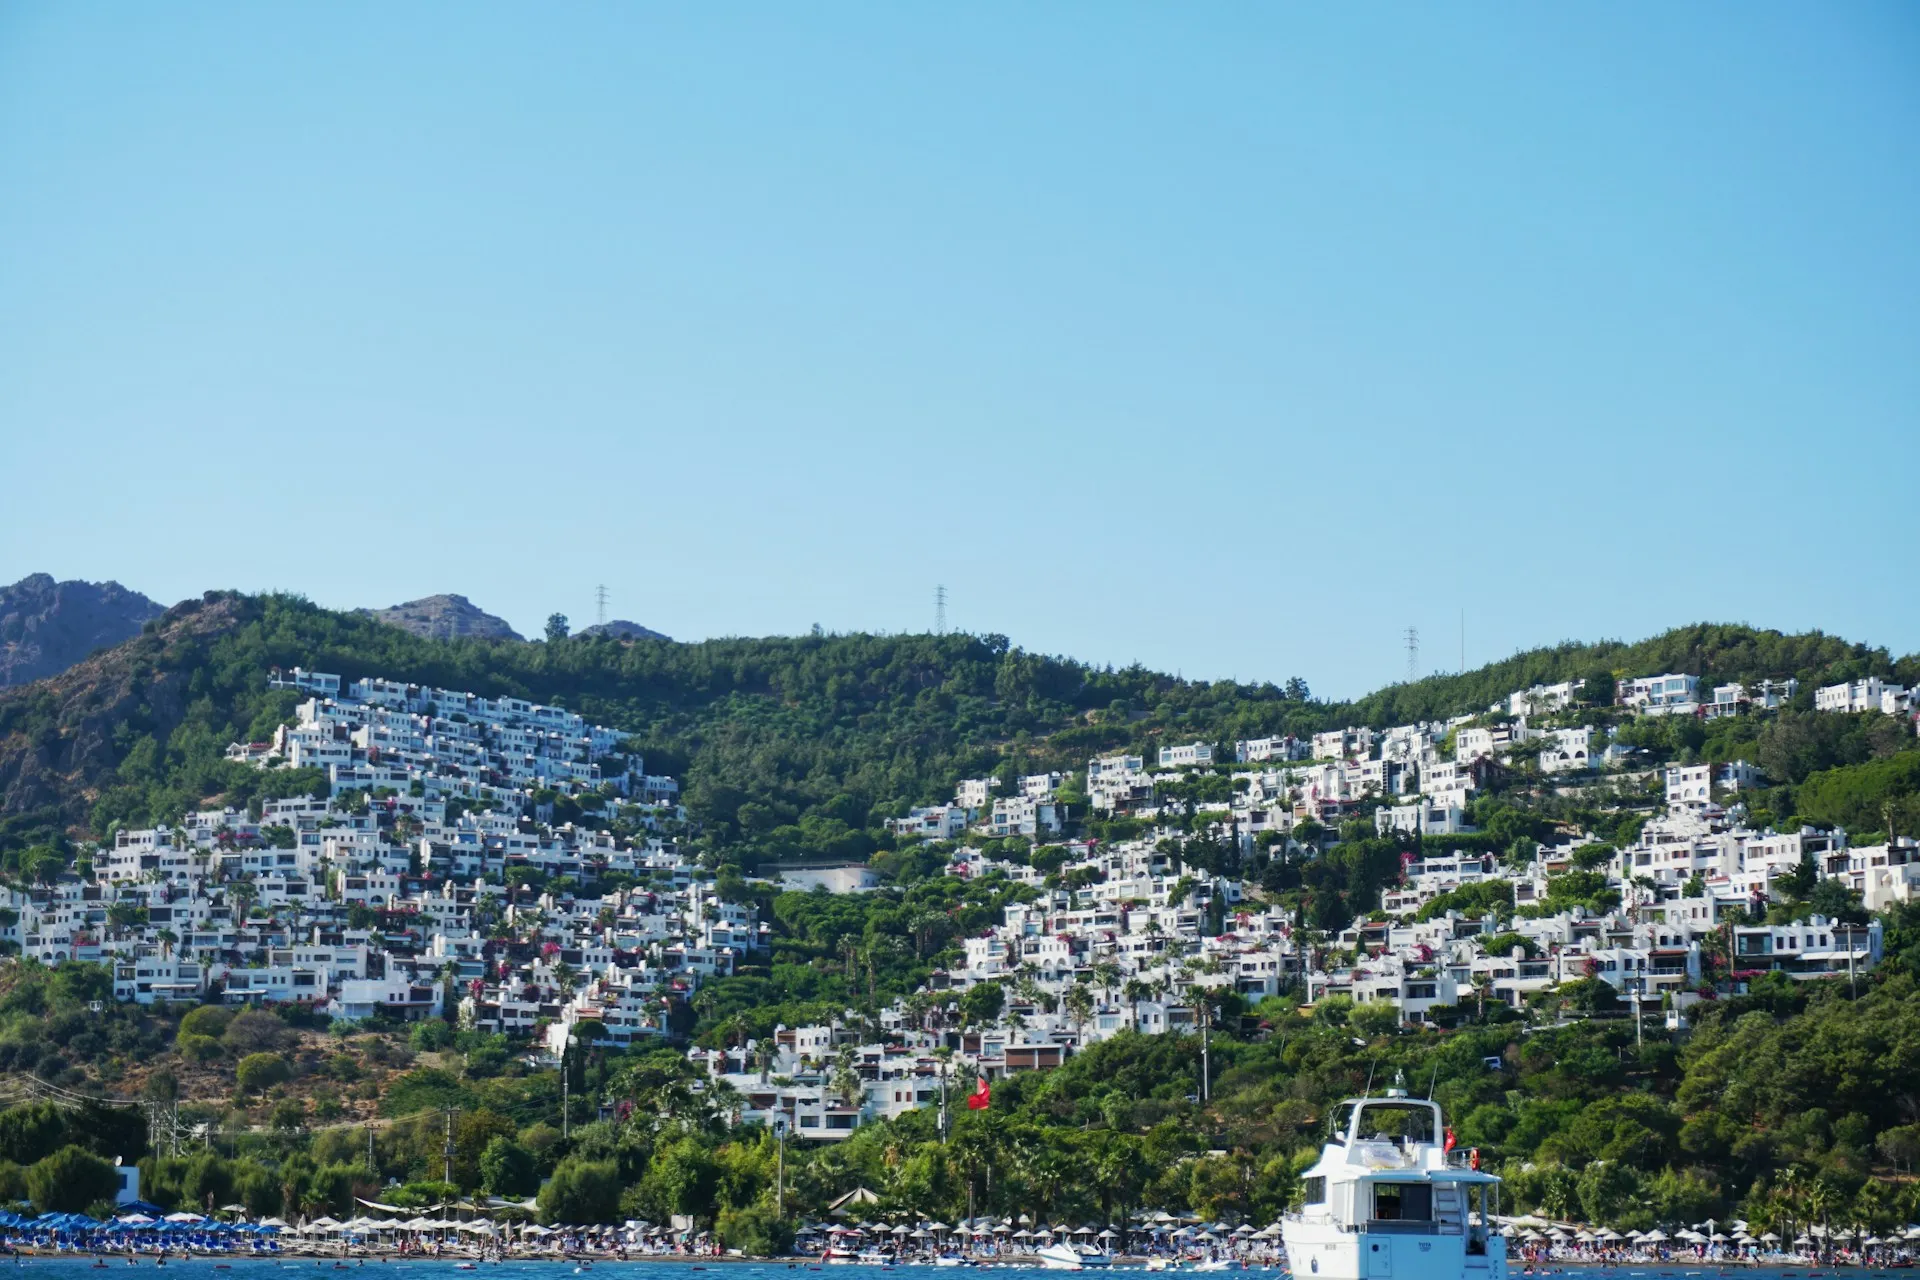 Cityscape of Bodrum. Source: Photo by Keoma Oran on Unsplash